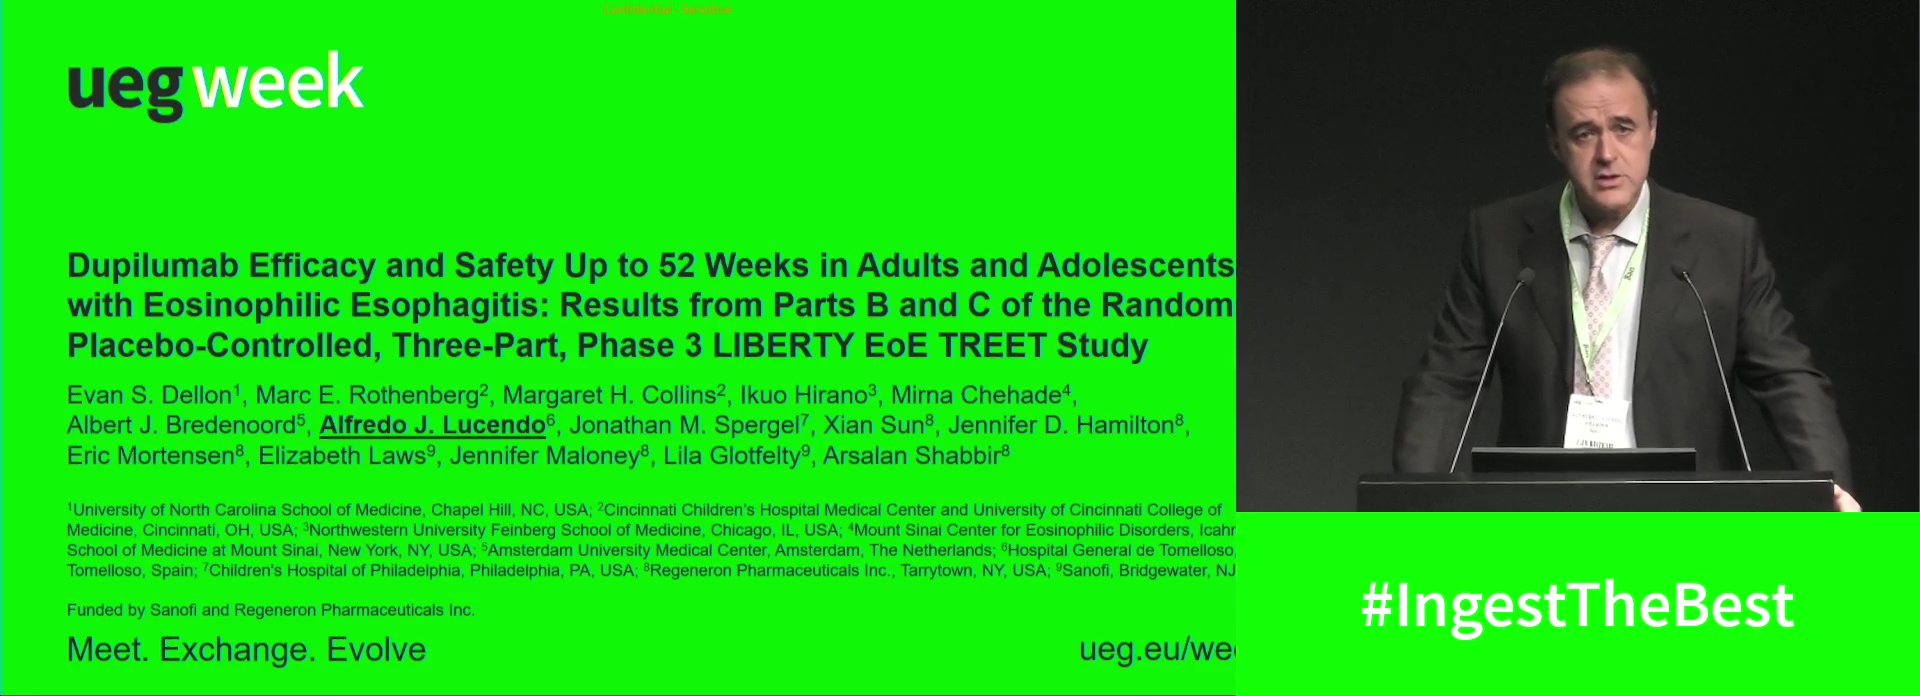 DUPILUMAB EFFICACY AND SAFETY UP TO 52 WEEKS IN ADULT AND ADOLESCENT PATIENTS WITH EOSINOPHILIC ESOPHAGITIS: RESULTS FROM PARTS B AND C OF THE RANDOMIZED, PLACEBO-CONTROLLED, THREE-PART, PHASE 3 LIBERTY EOE TREET STUDY